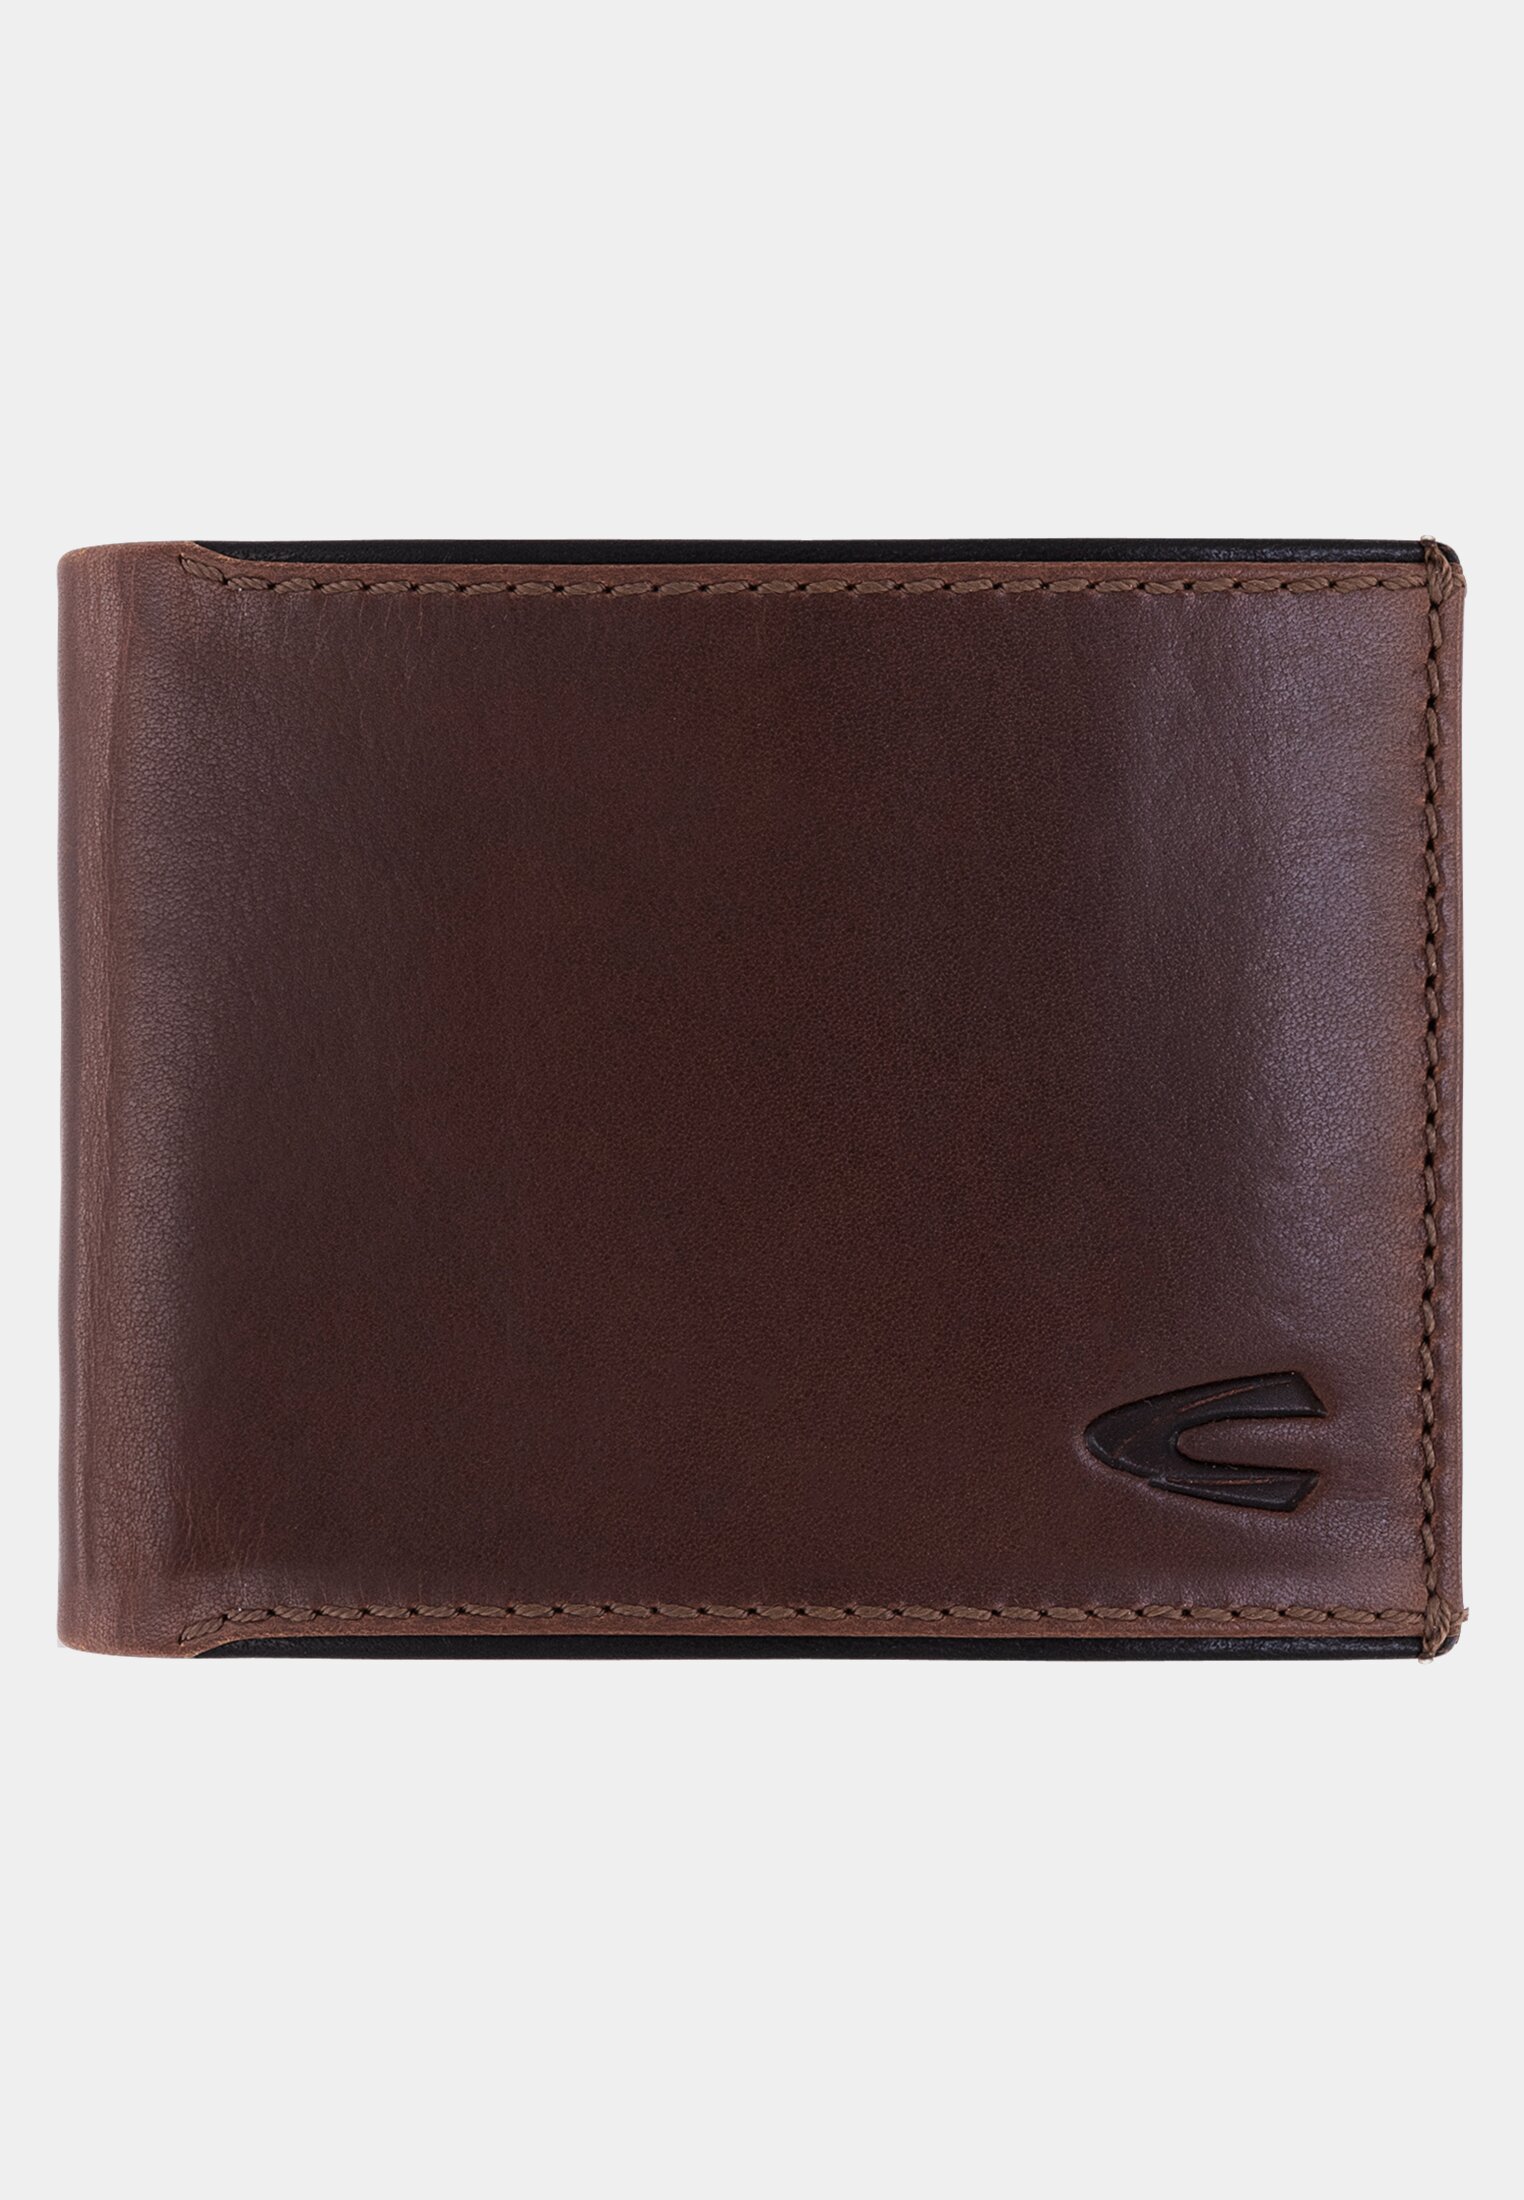 Camel Active Wallet from genuine leather